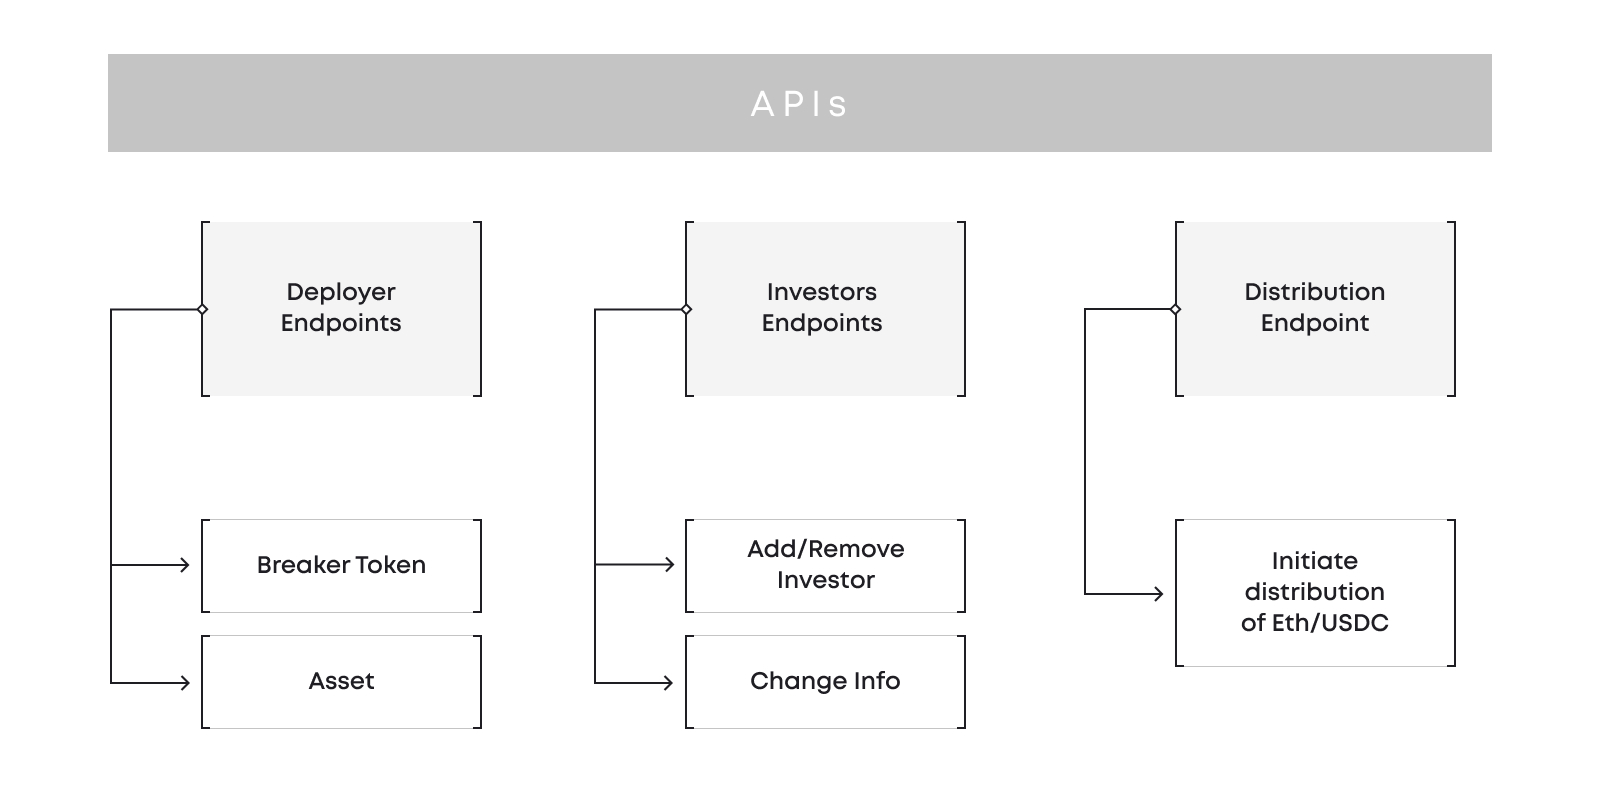 The structure of created APIs